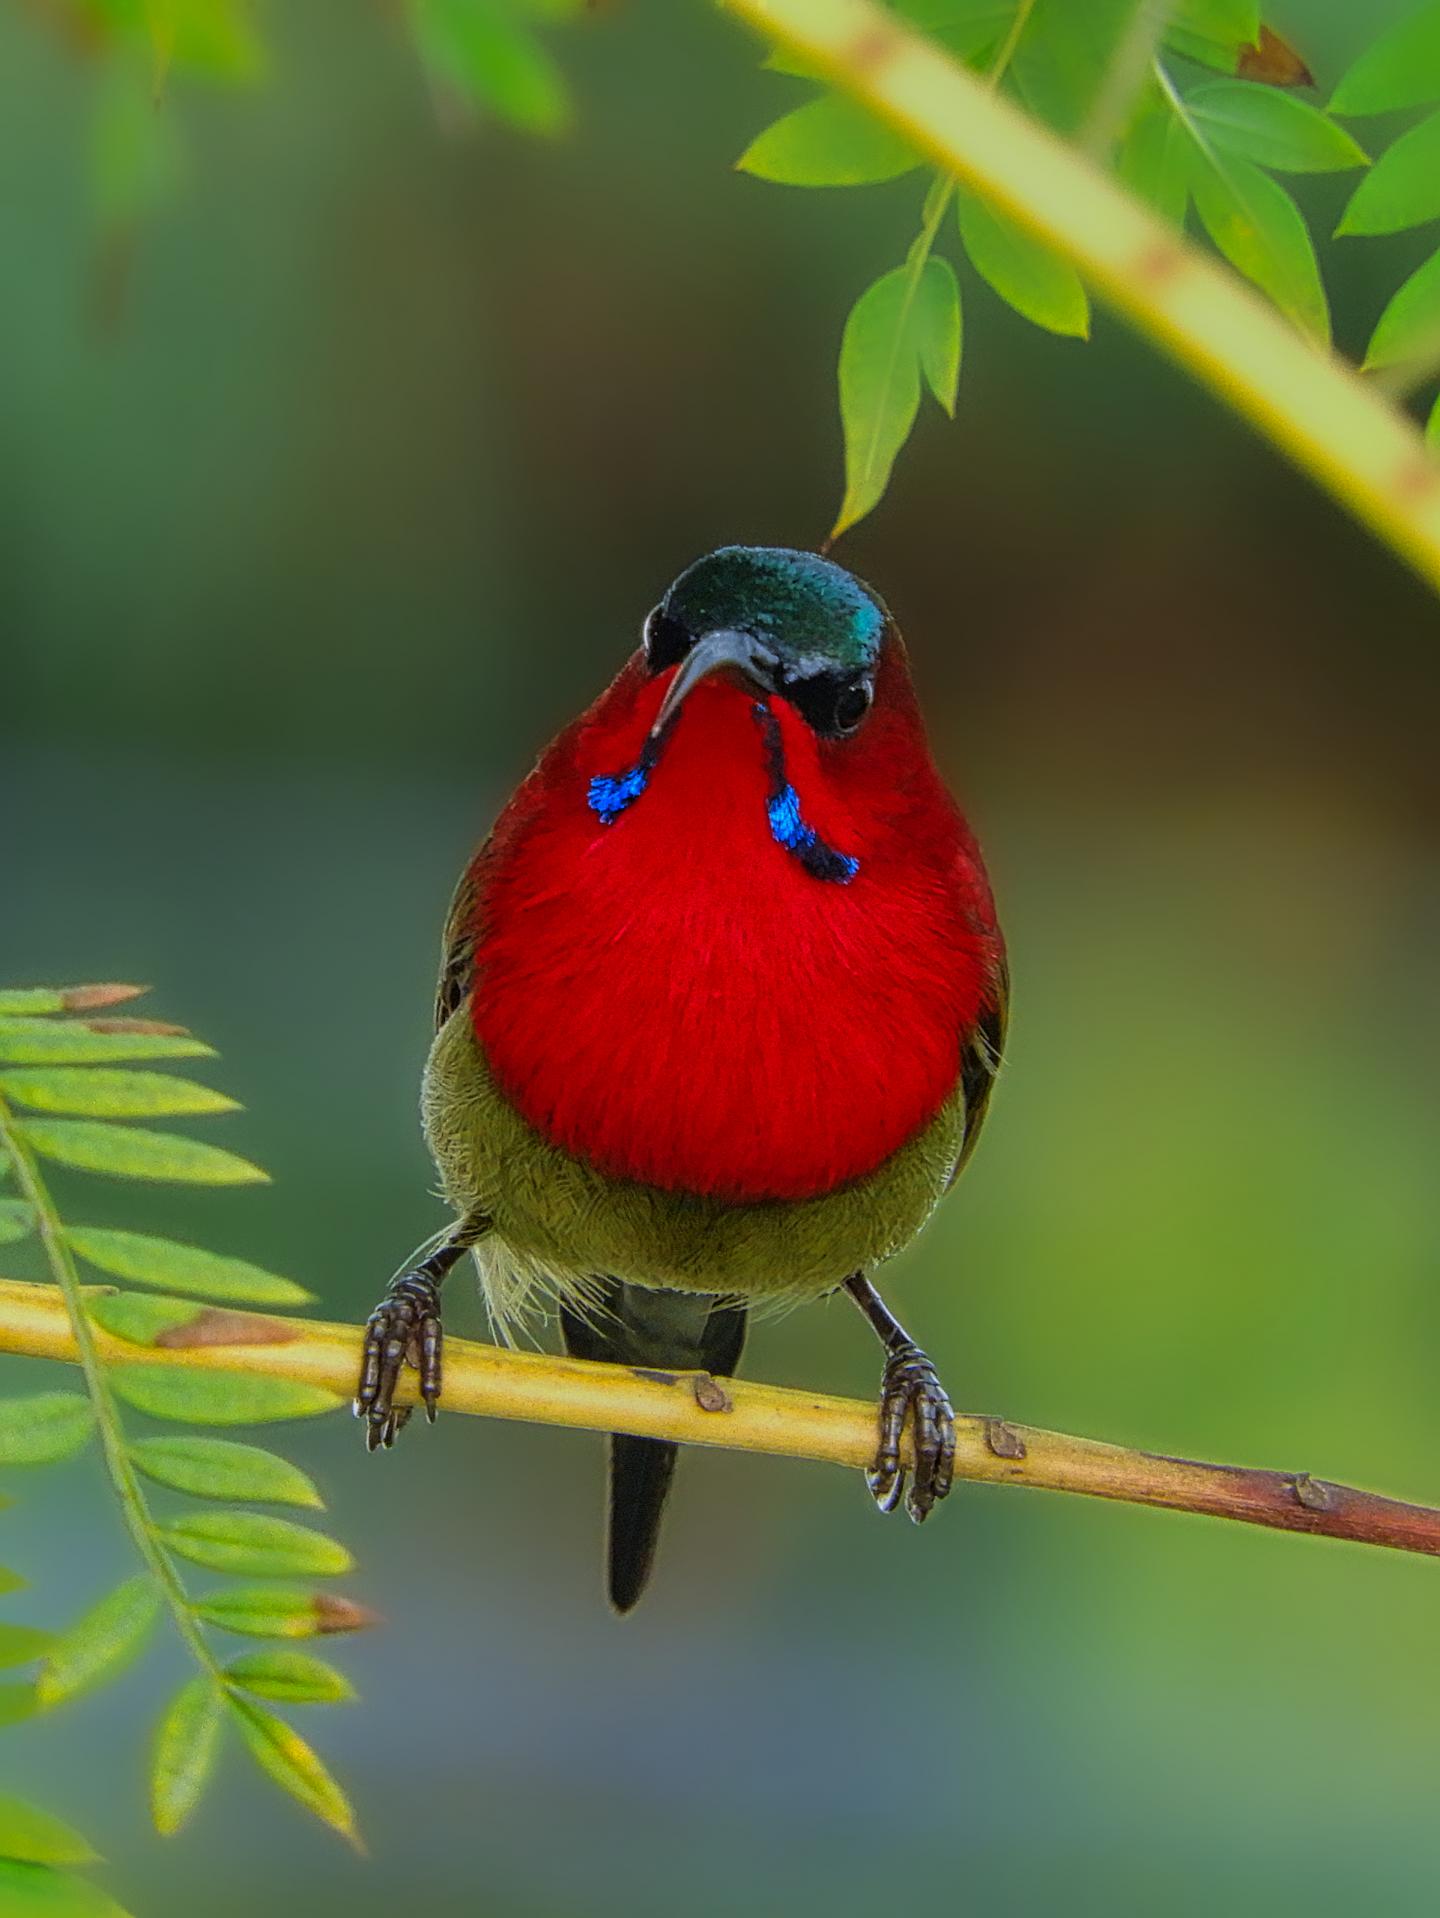 A crimson sunbird in the wild, one of many songbirds, or passerines, studied.